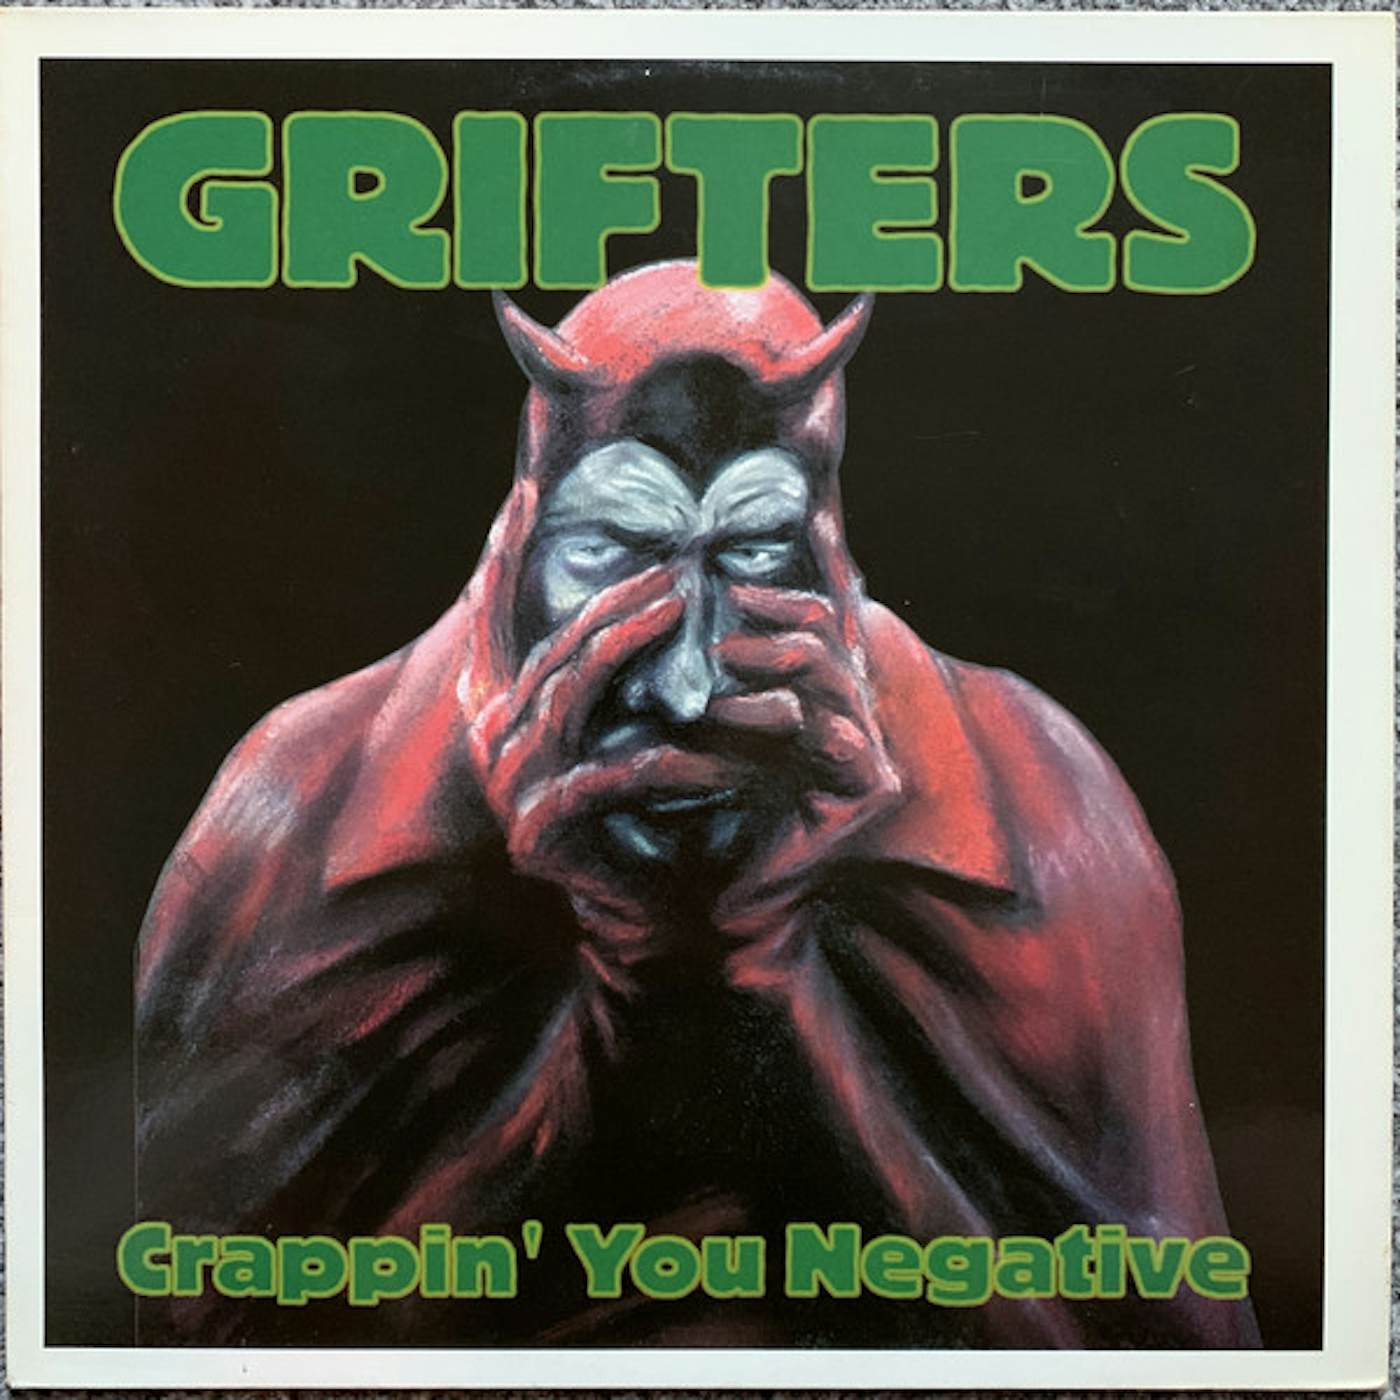 The Grifters CRAPPIN YOU NEGATIVE Vinyl Record - UK Release